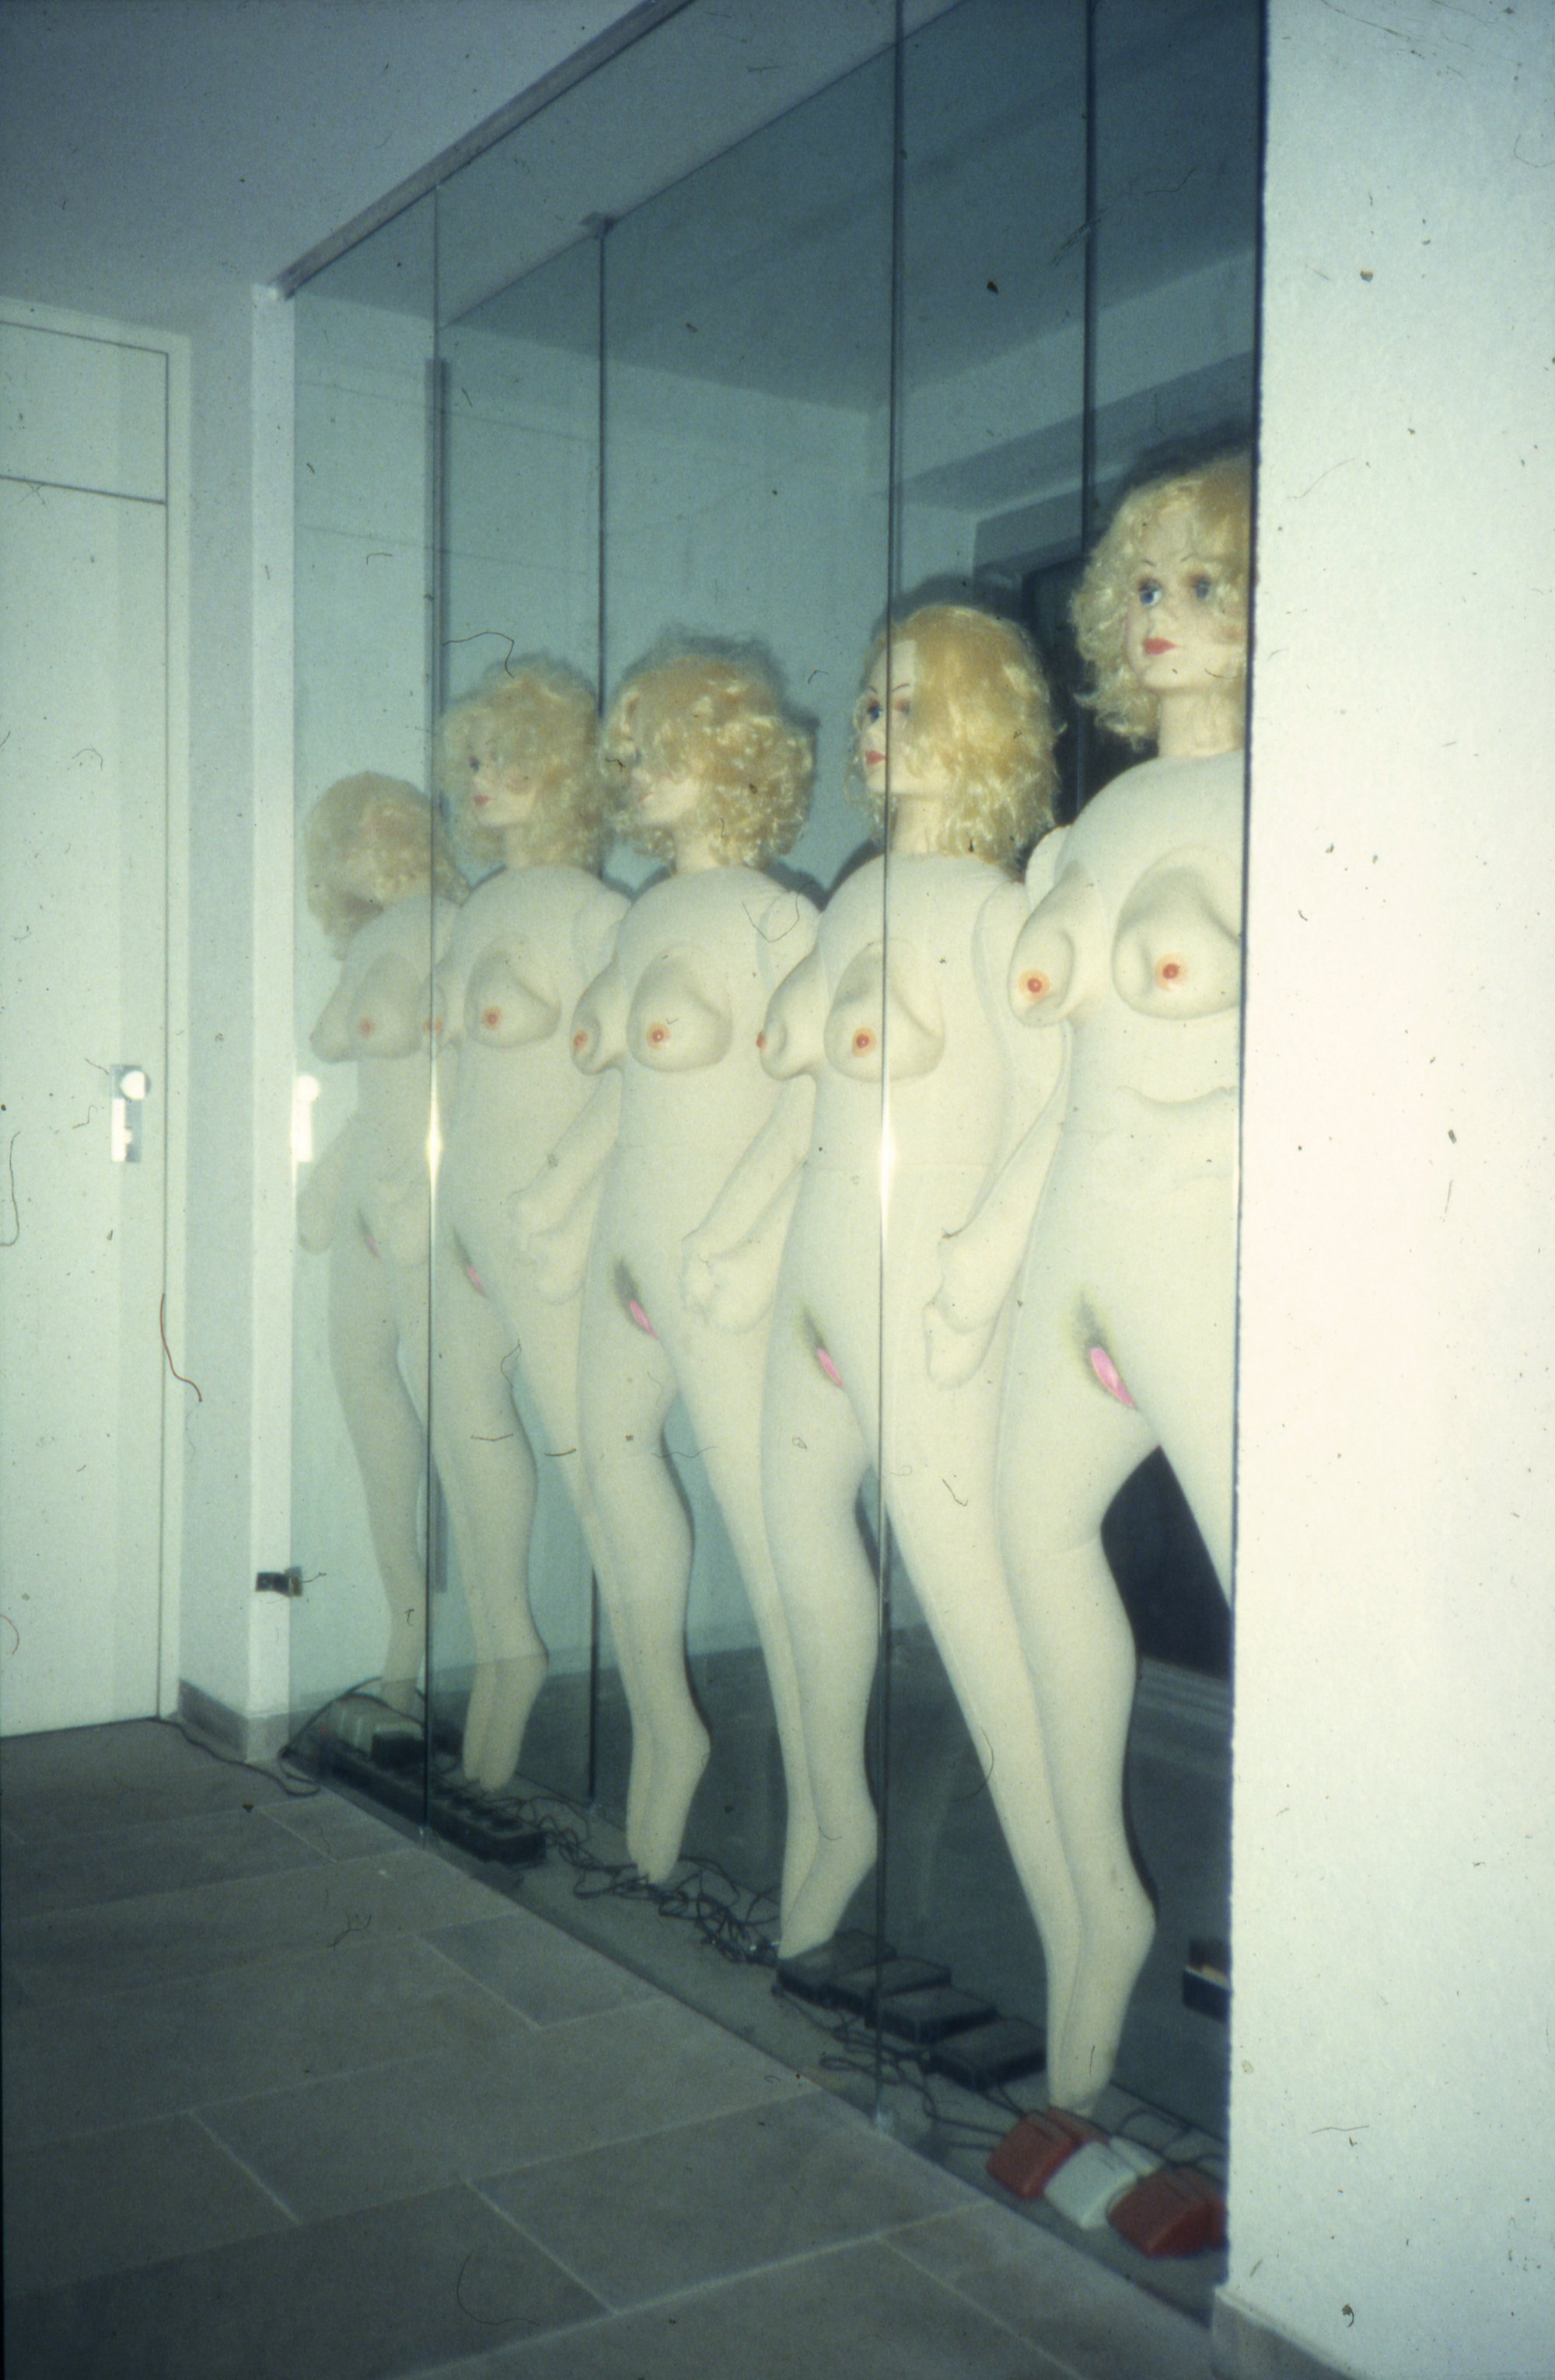 Liliana Moro, Fire, five inflatable dolls compressed between two glass plates, 1992. Installation view, Documenta IX, Kassel, 1992